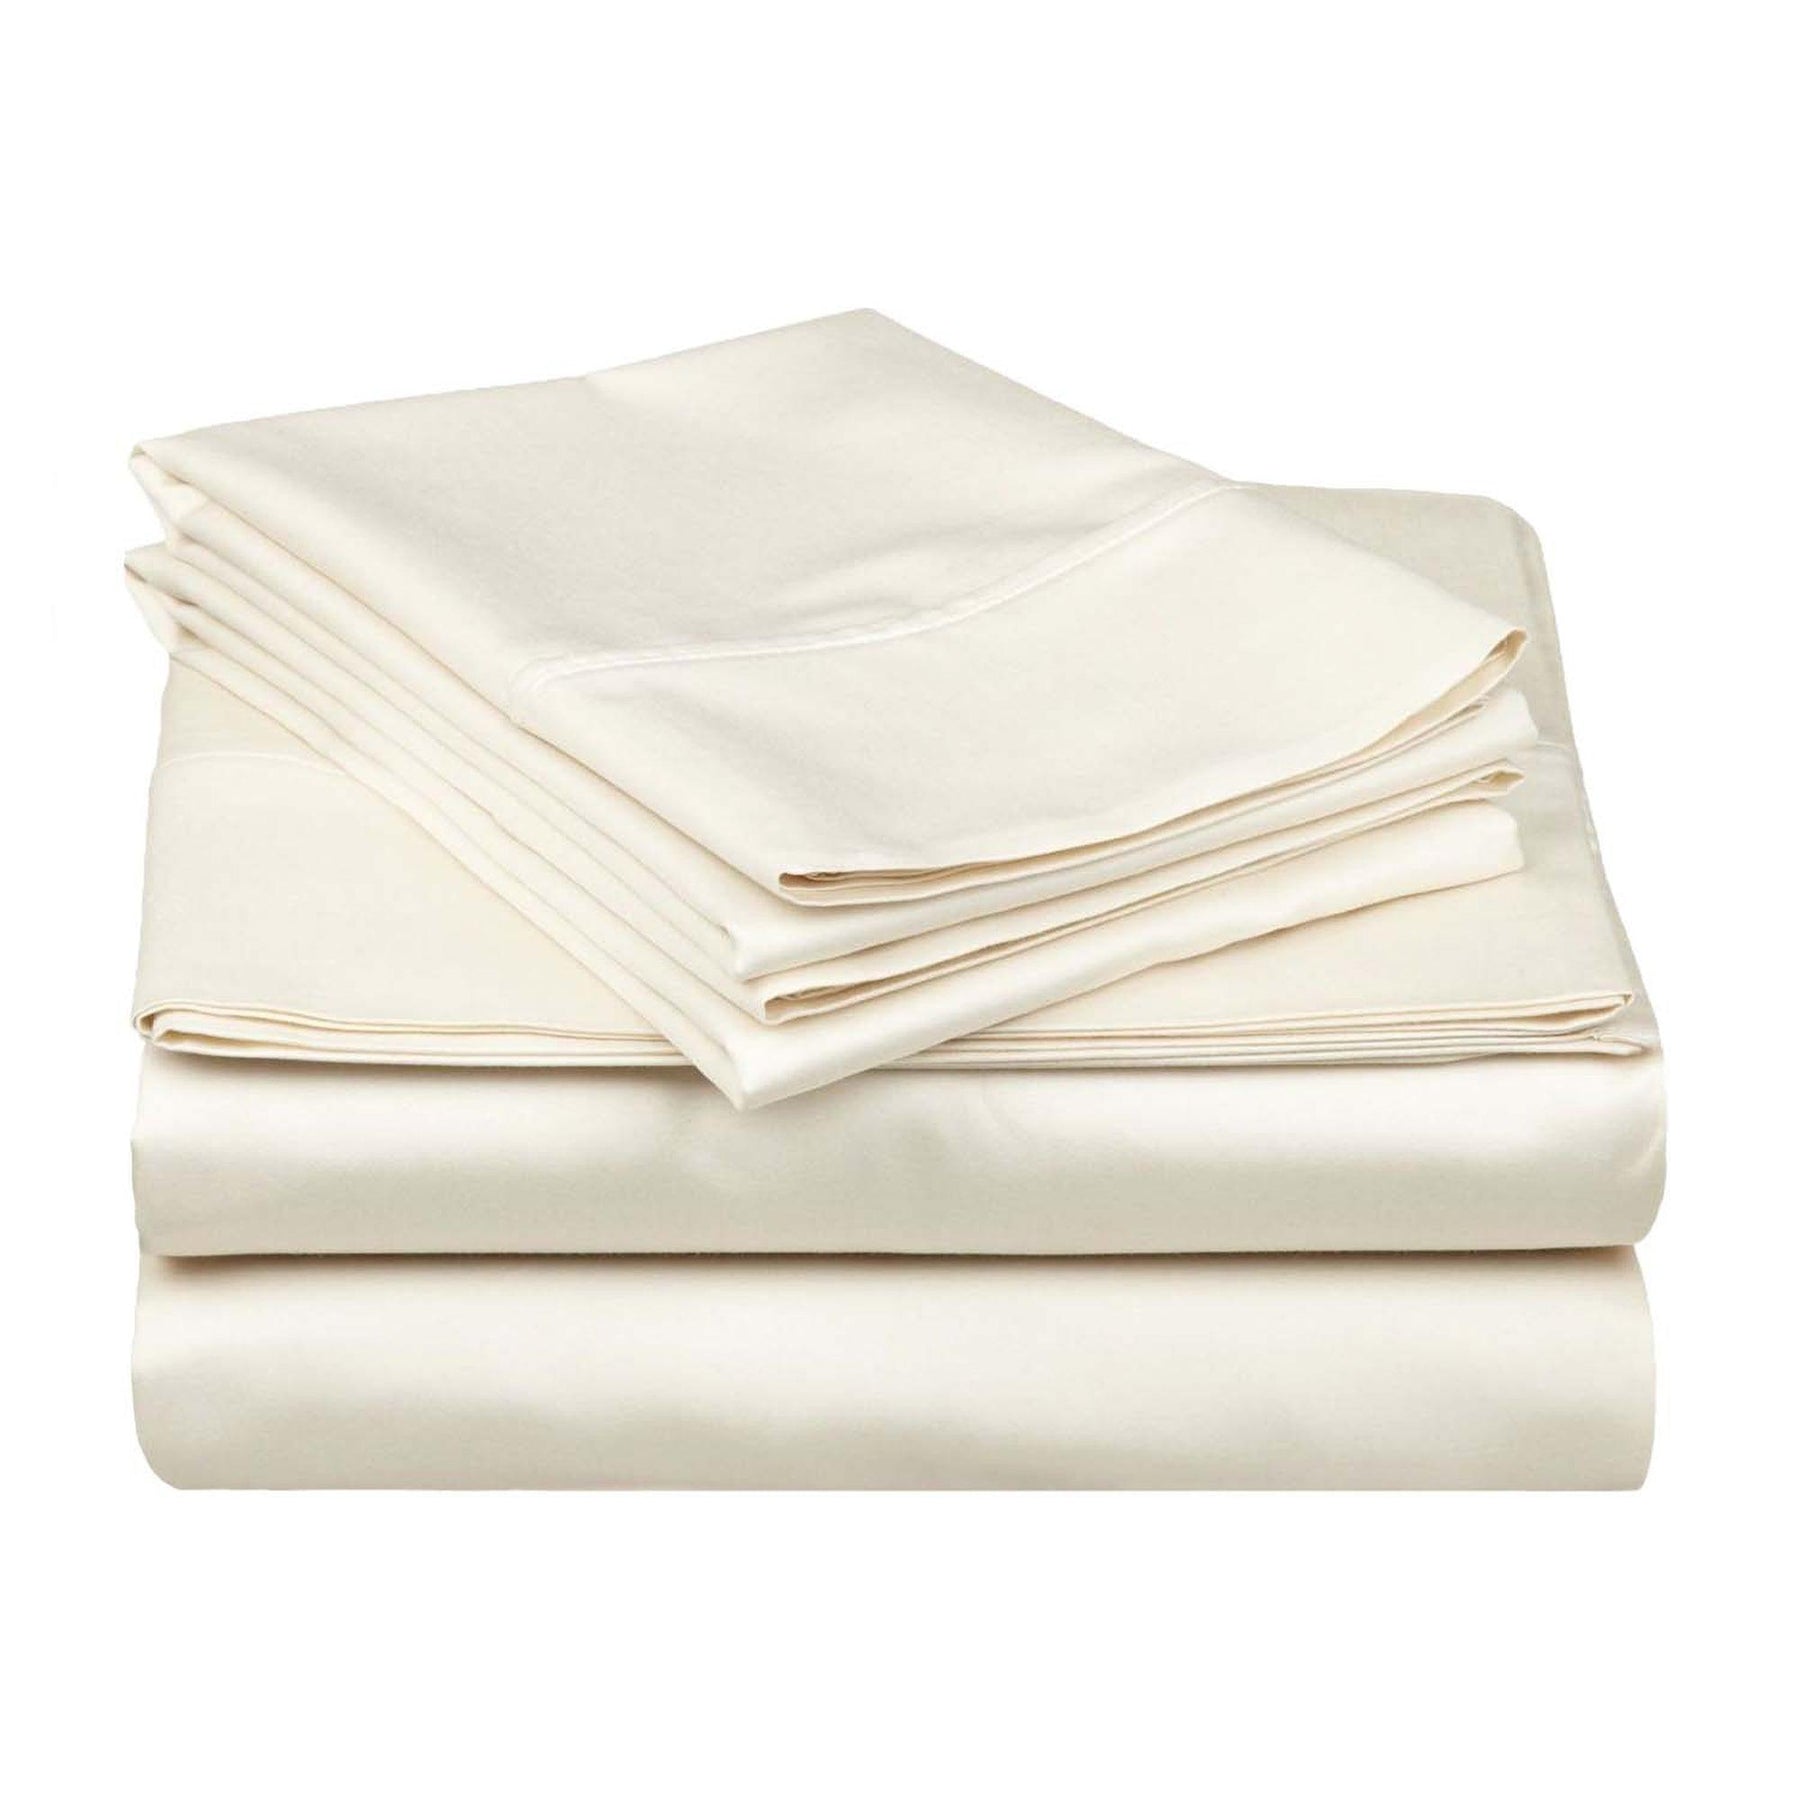  Superior Egyptian Cotton 530 Thread Count Solid Sheet Set - Ivory